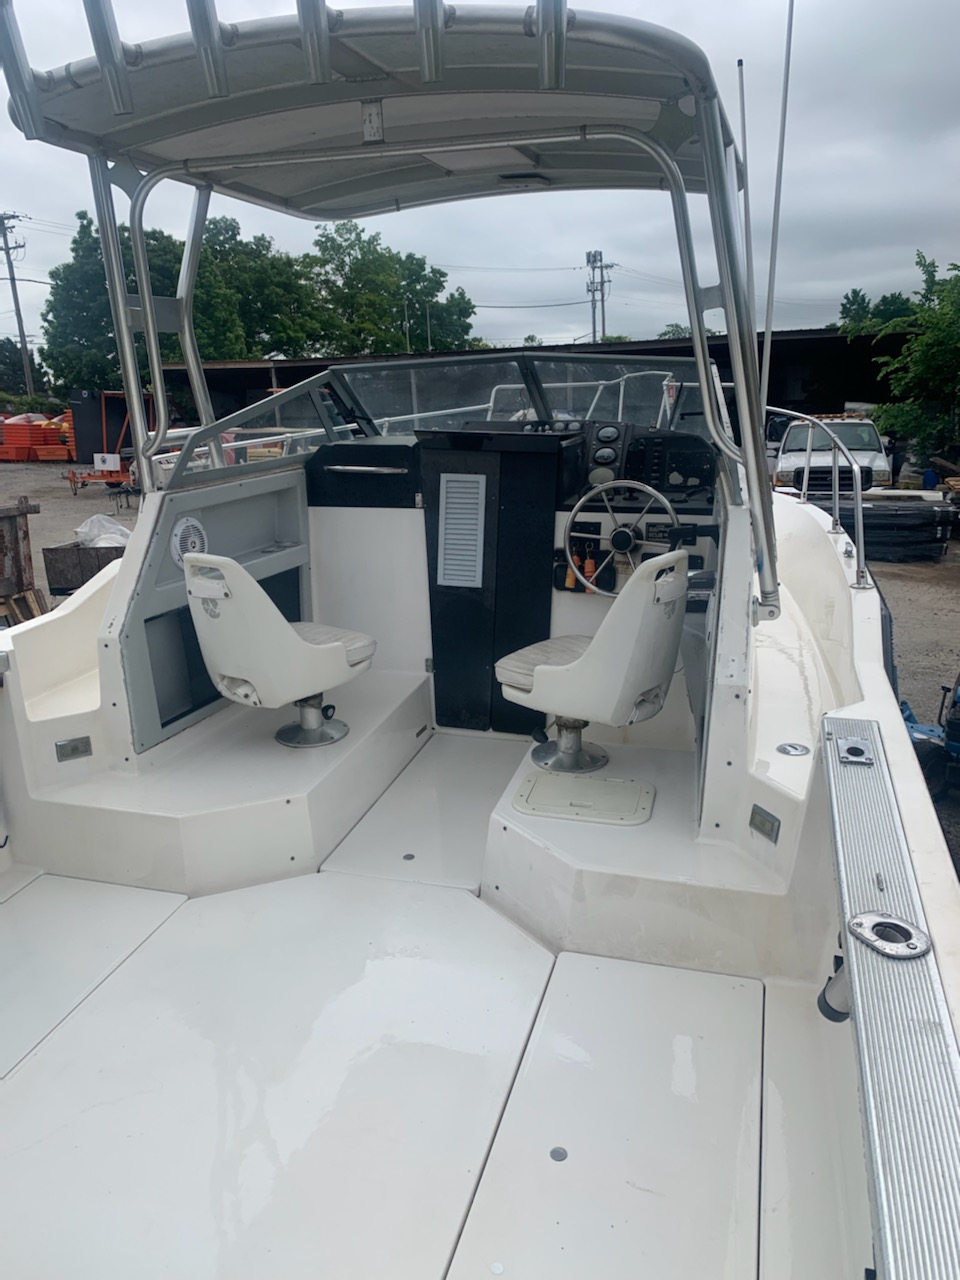 1989 23 foot Bayliner Trophy Power boat for sale in Annapolis Jct, MD - image 2 